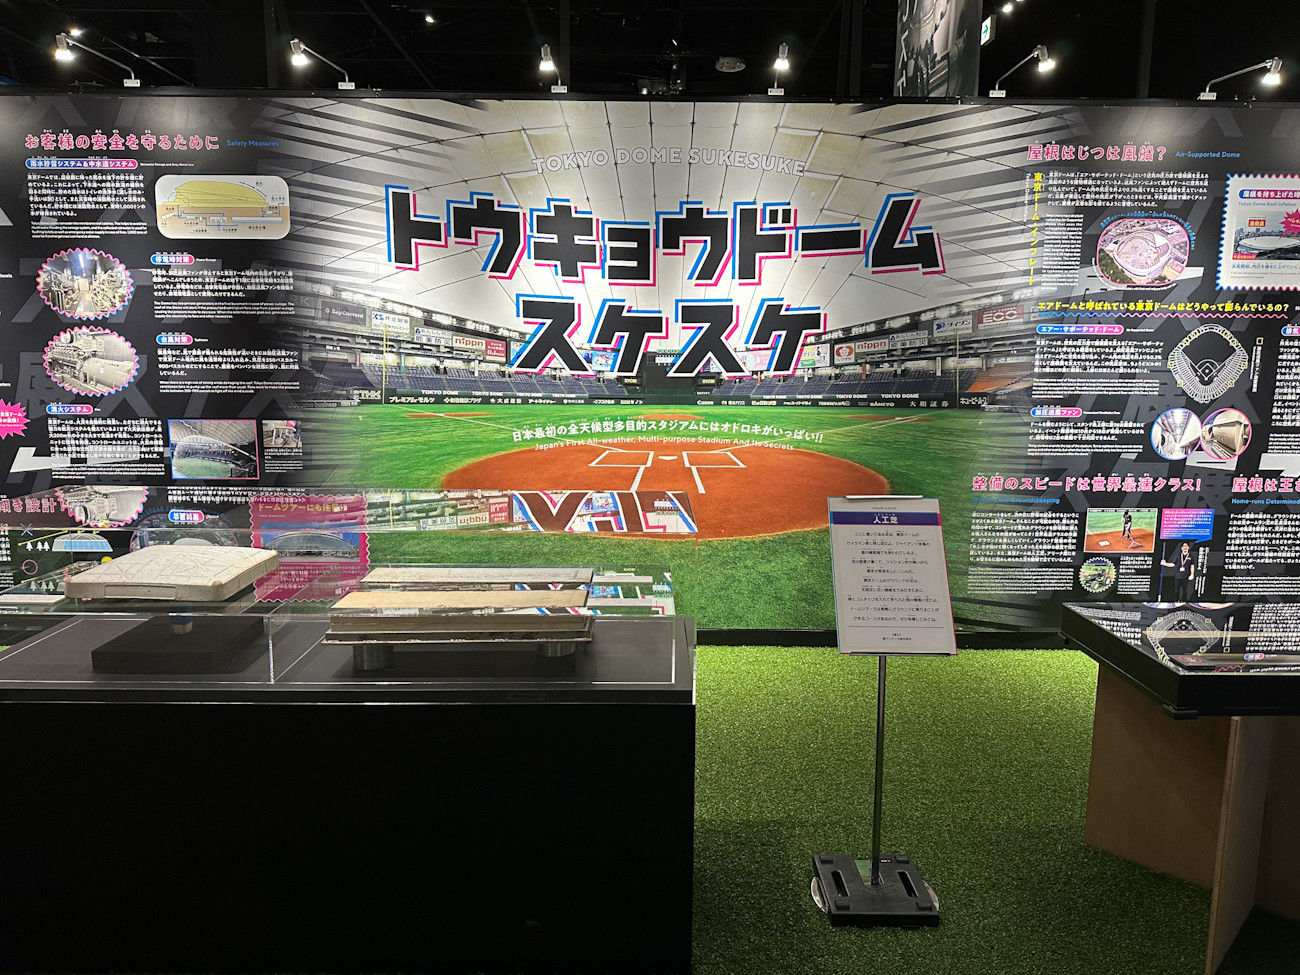 Gallery AaMo「スケスケ展 in TOKYO」会場